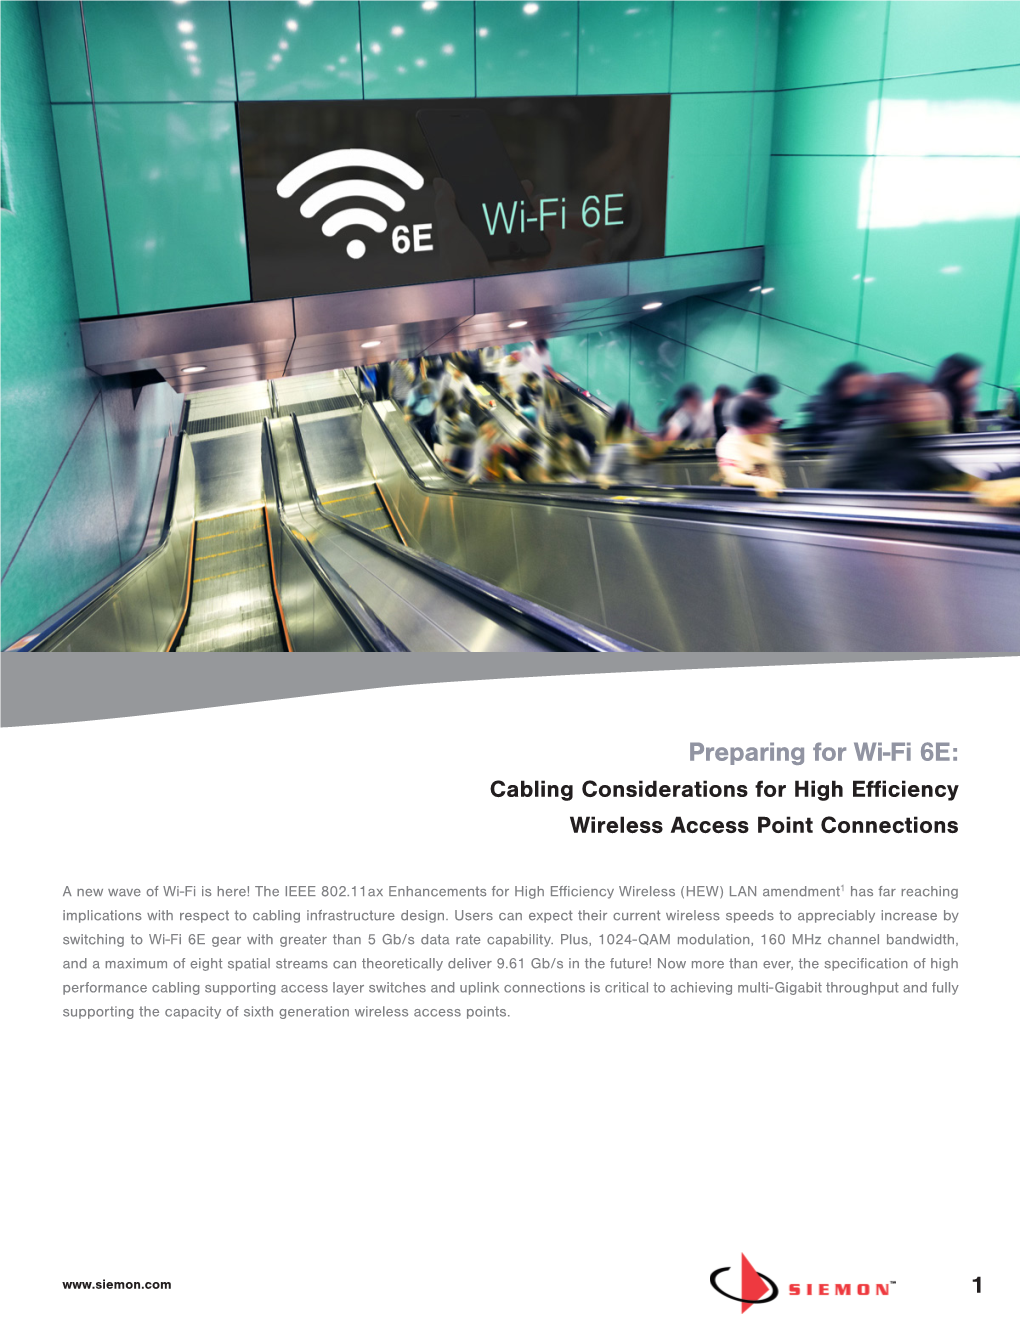 Preparing for Wi-Fi 6E: Cabling Considerations for High Efficiency Wireless Access Point Connections